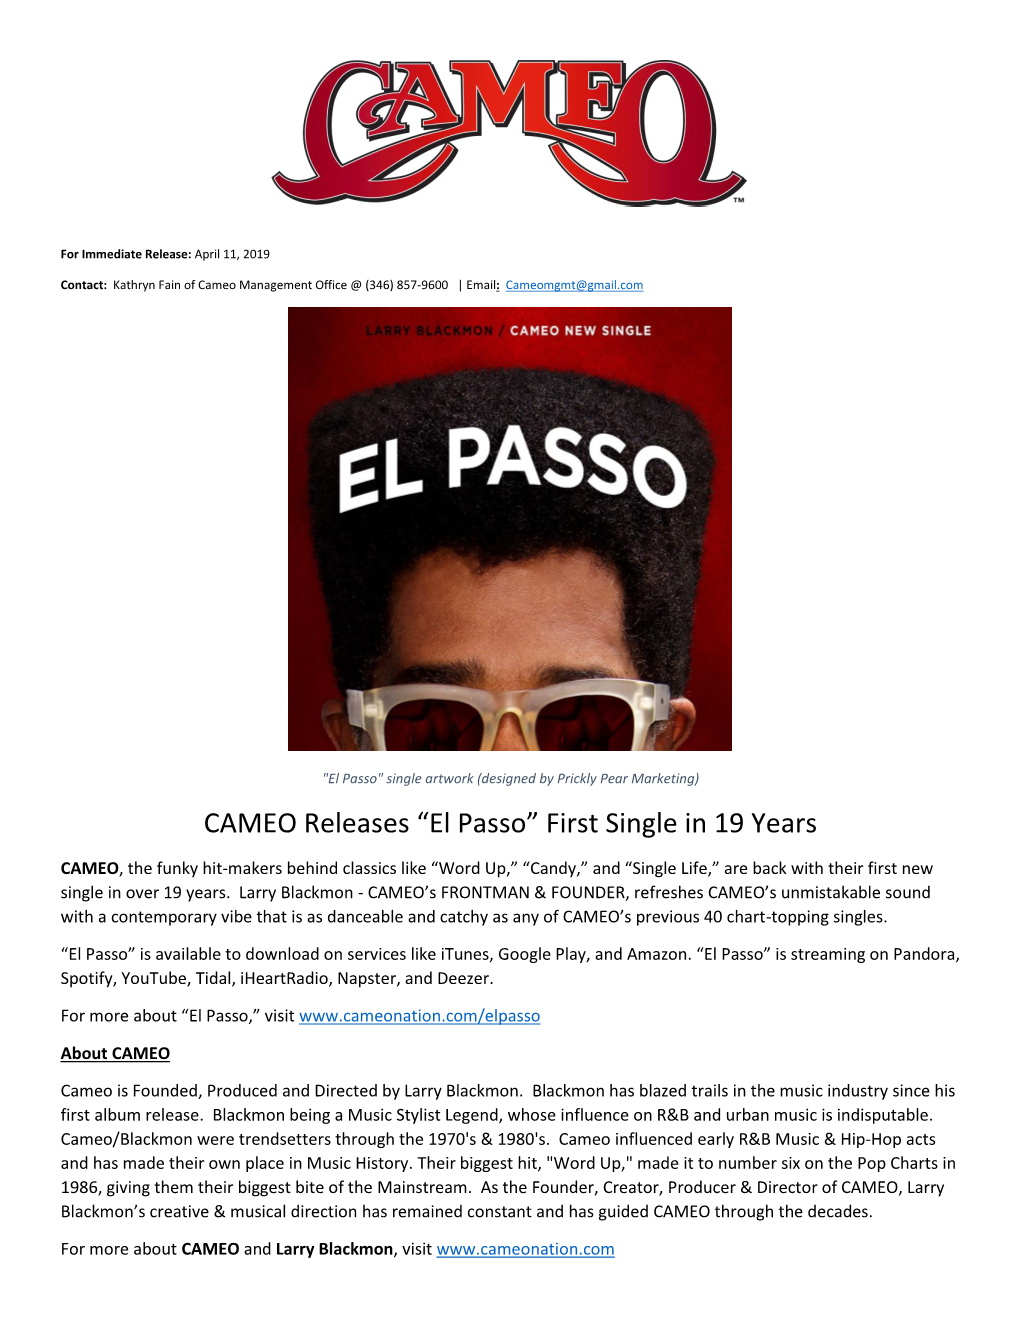 CAMEO Releases “El Passo” First Single in 19 Years